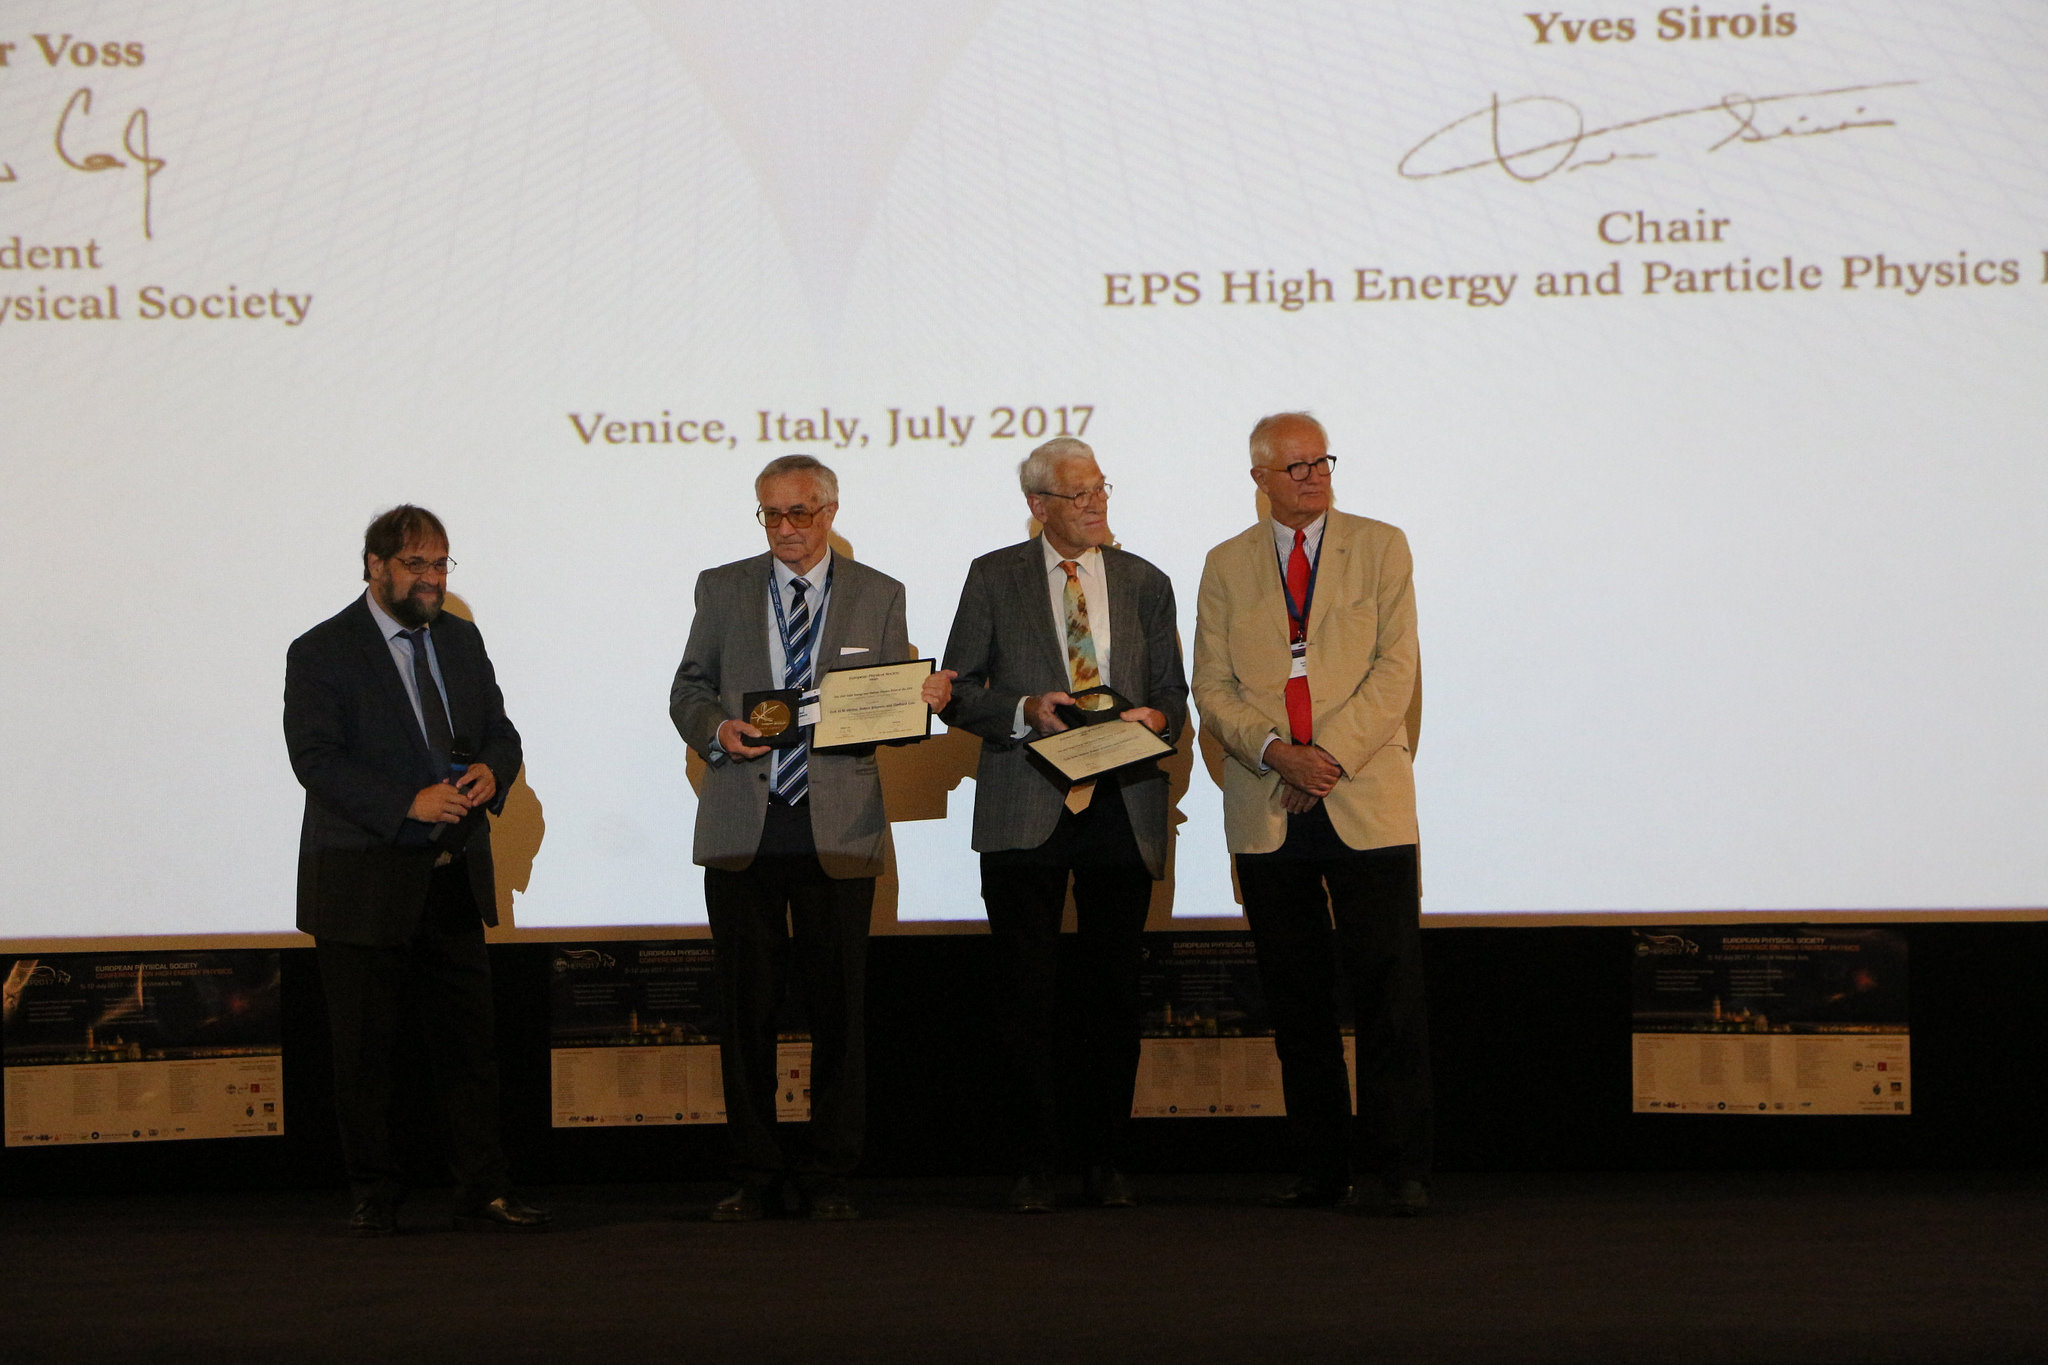 (On the picture from left to right: Yves Sirois, chairman of EPS HEP Board, Robert Klanner, Erik H.M.  Heijne, díjazottak, Rüdiger Voss, chairman of EPS) 